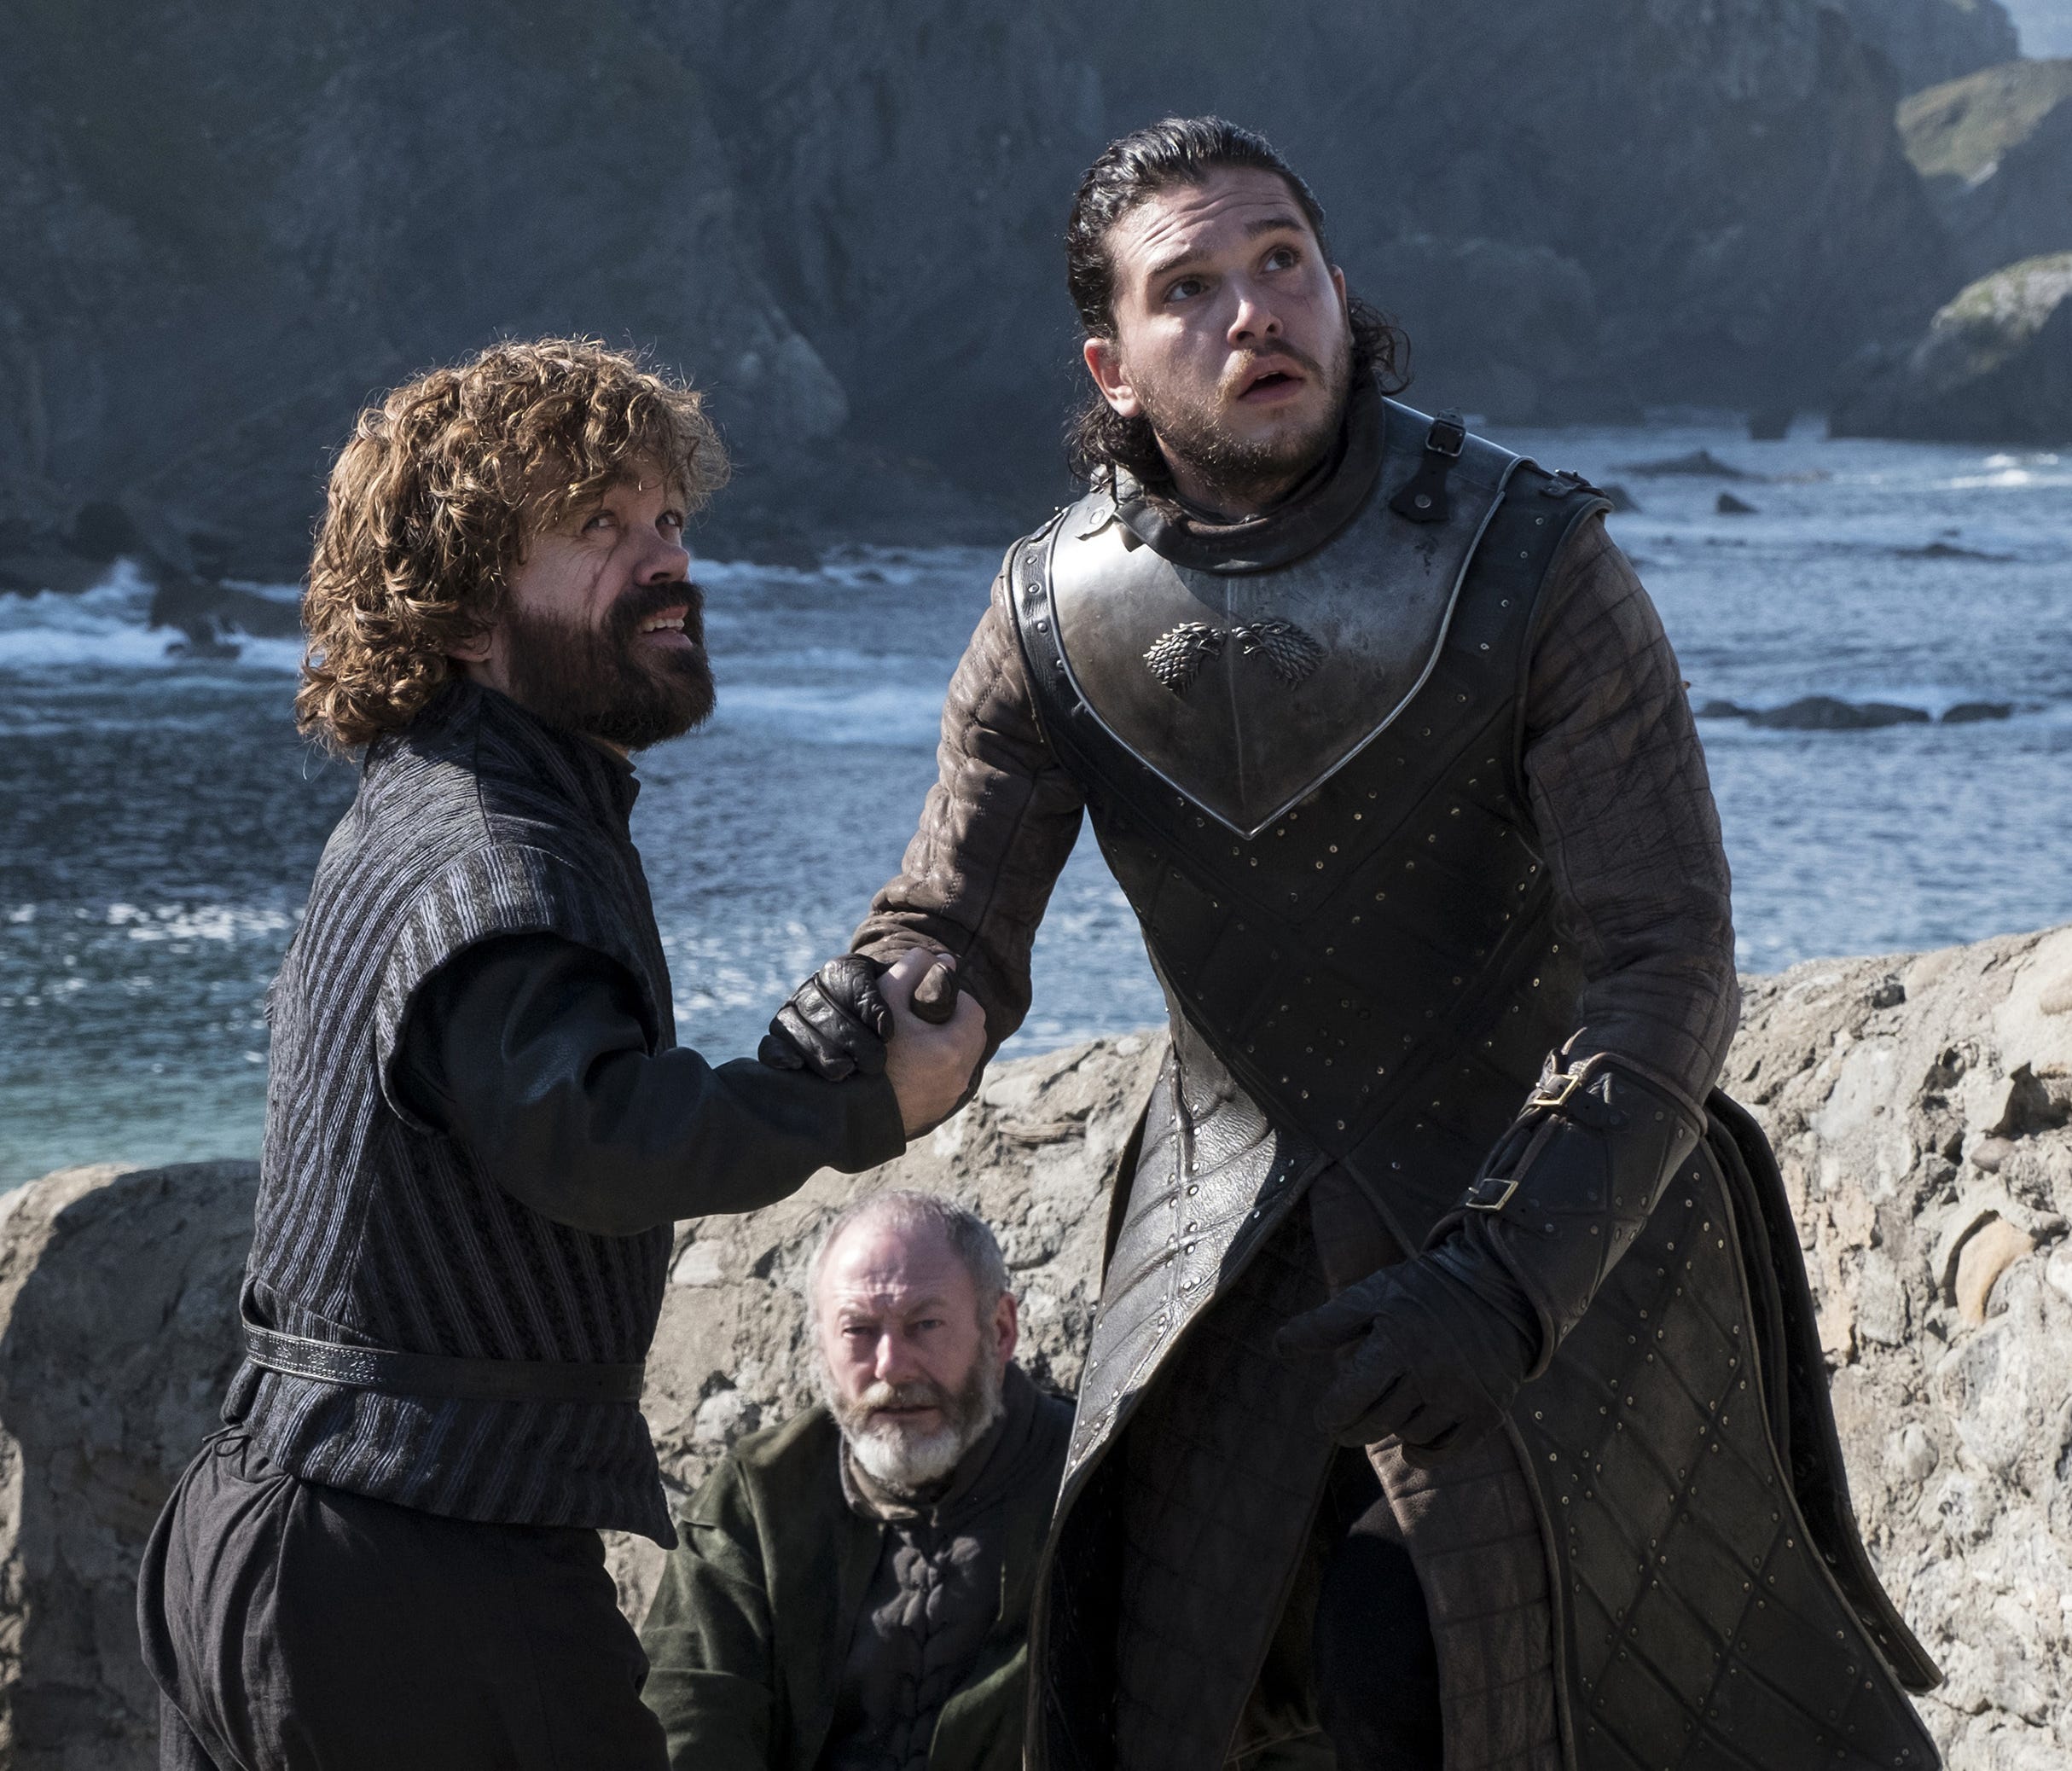 HBO has been working to contain leaked content stolen in this weekend's hacks, especially episodes and script outlines of its top-rated show, 'Game of Thrones,' which were reportedly published Wednesday.